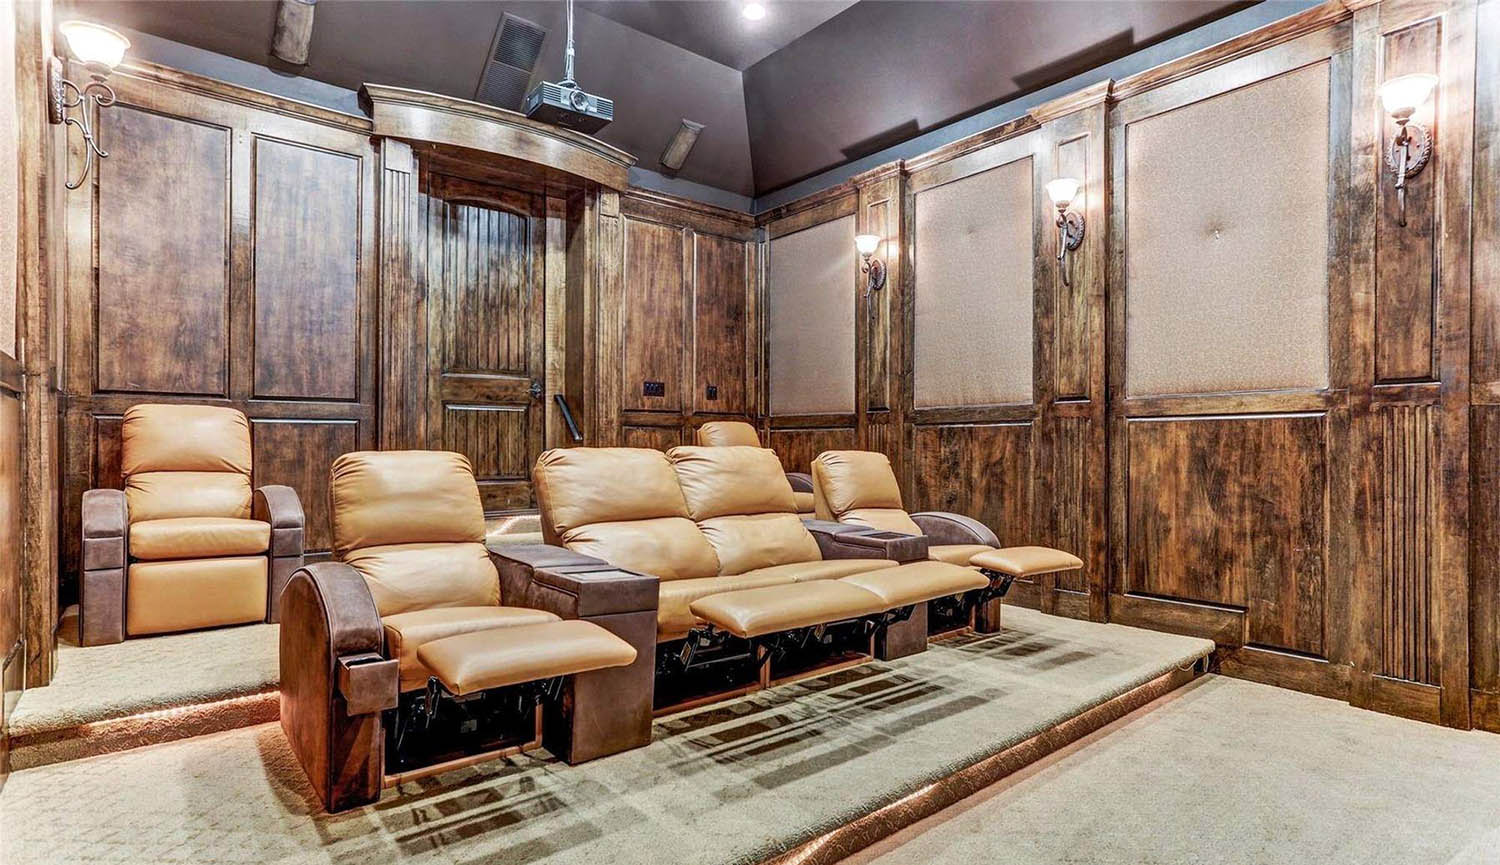 Theatre room with wood walls and carpeting. Leather recliners.